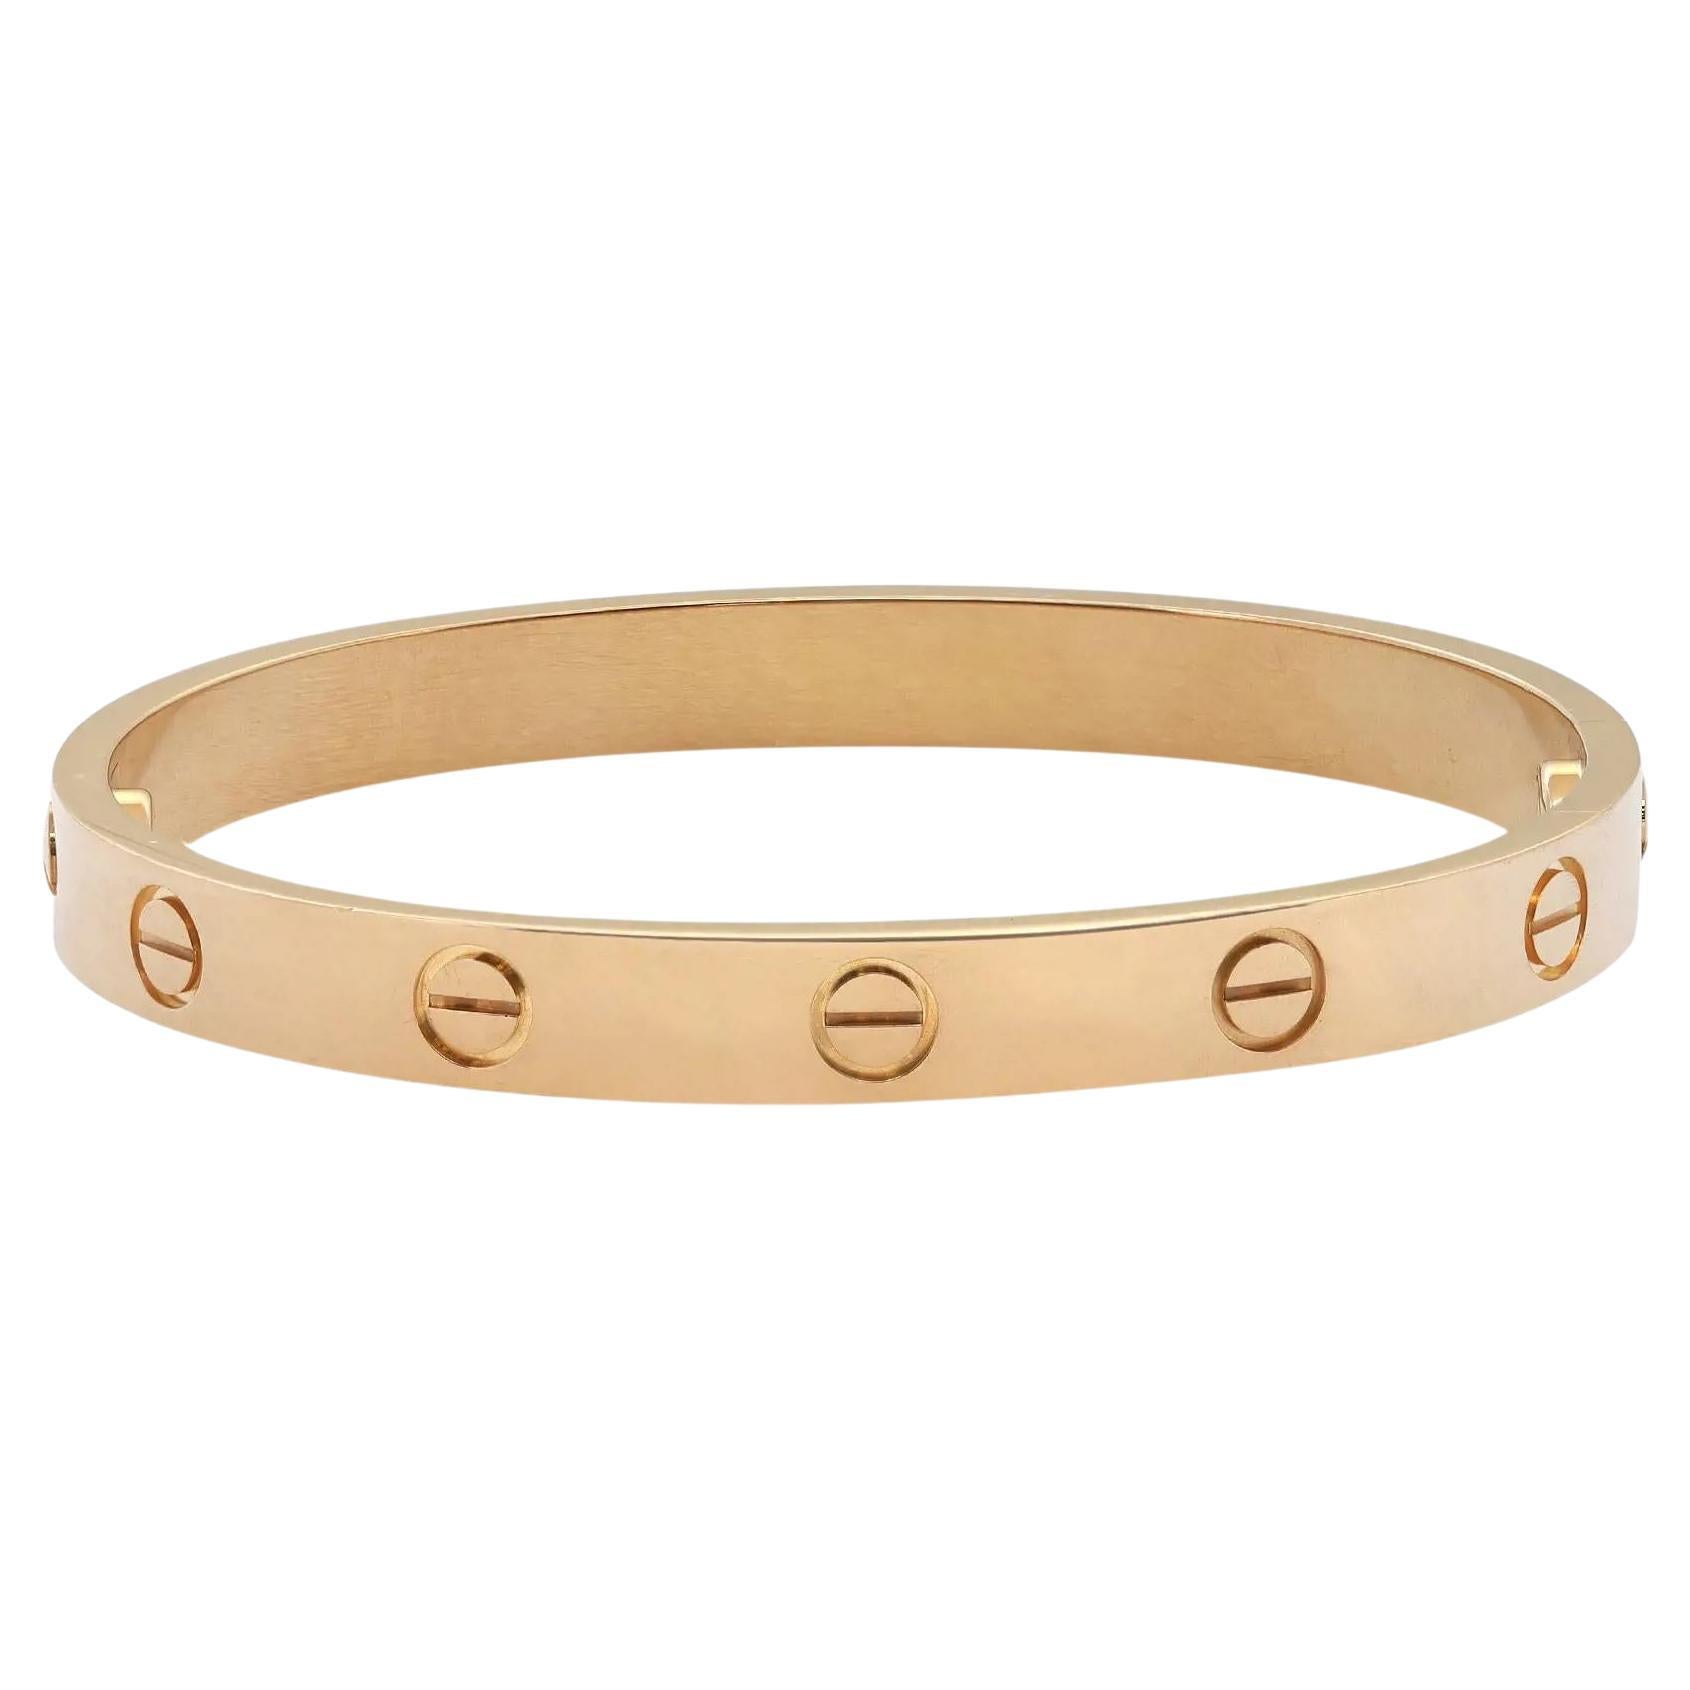 Cartier classic 18K yellow gold Love bangle bracelet. Size 16. Width: 6.1mm. New style screw system. Excellent pre-owned condition. Original box and papers are not included. Comes with a Chronostore appraisal and a presentable gift box. 
